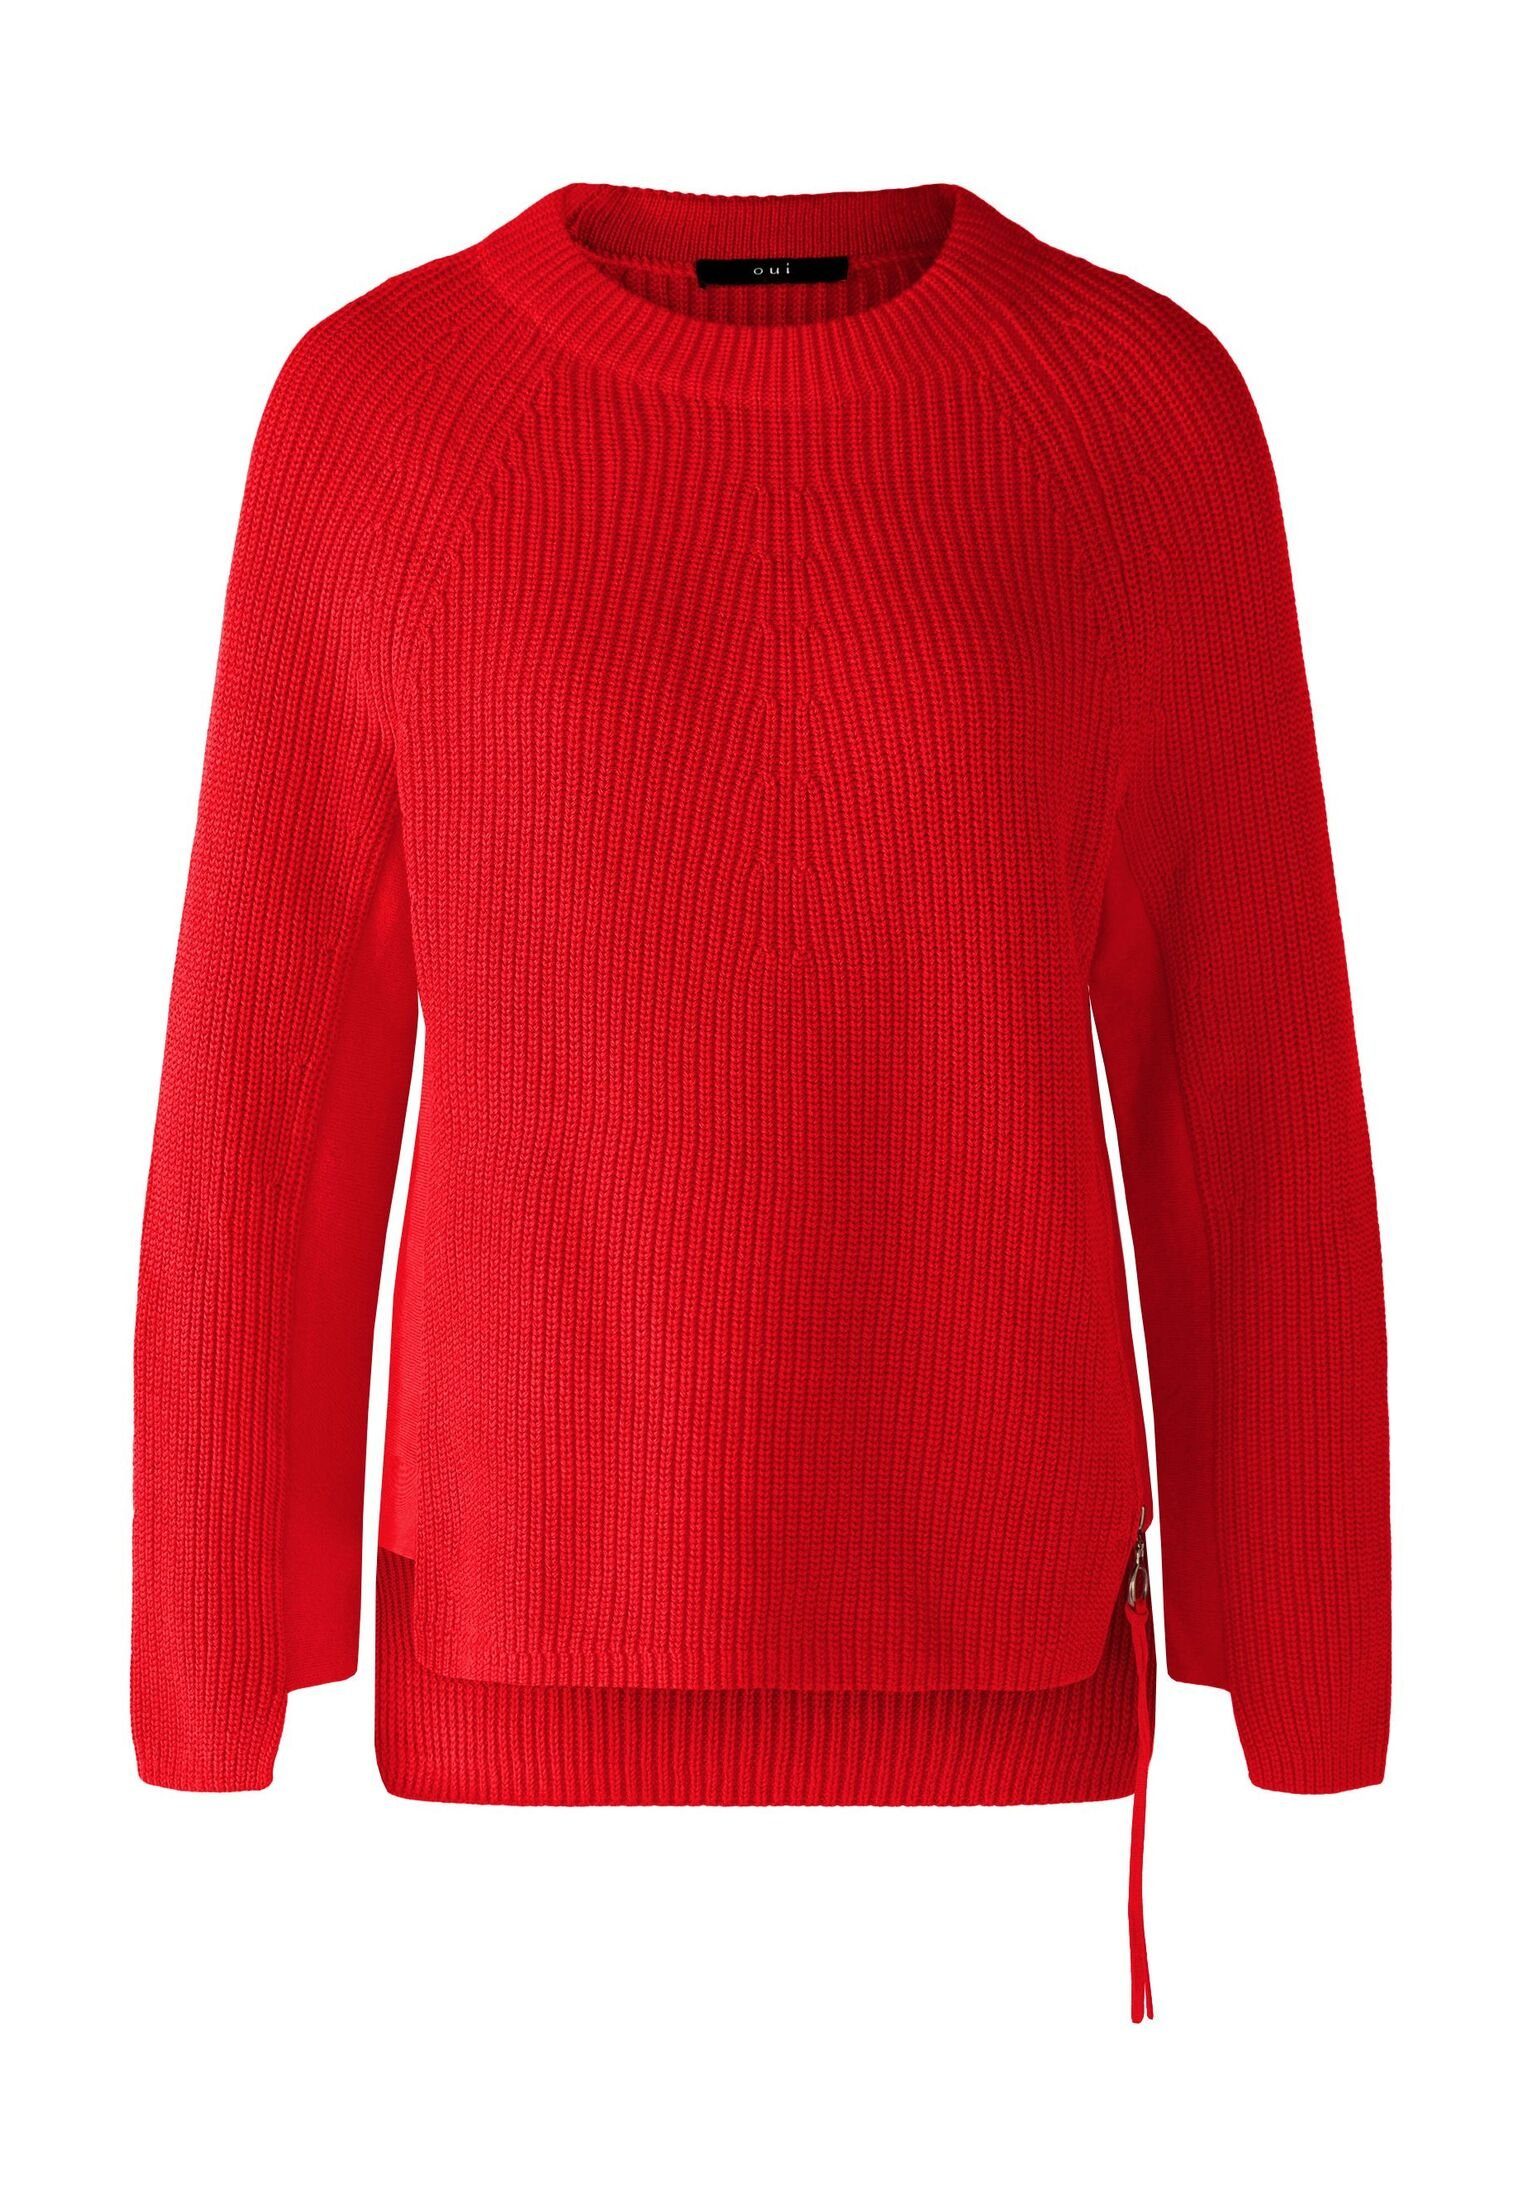 Oui Strickpullover Pullover RUBI chinese red